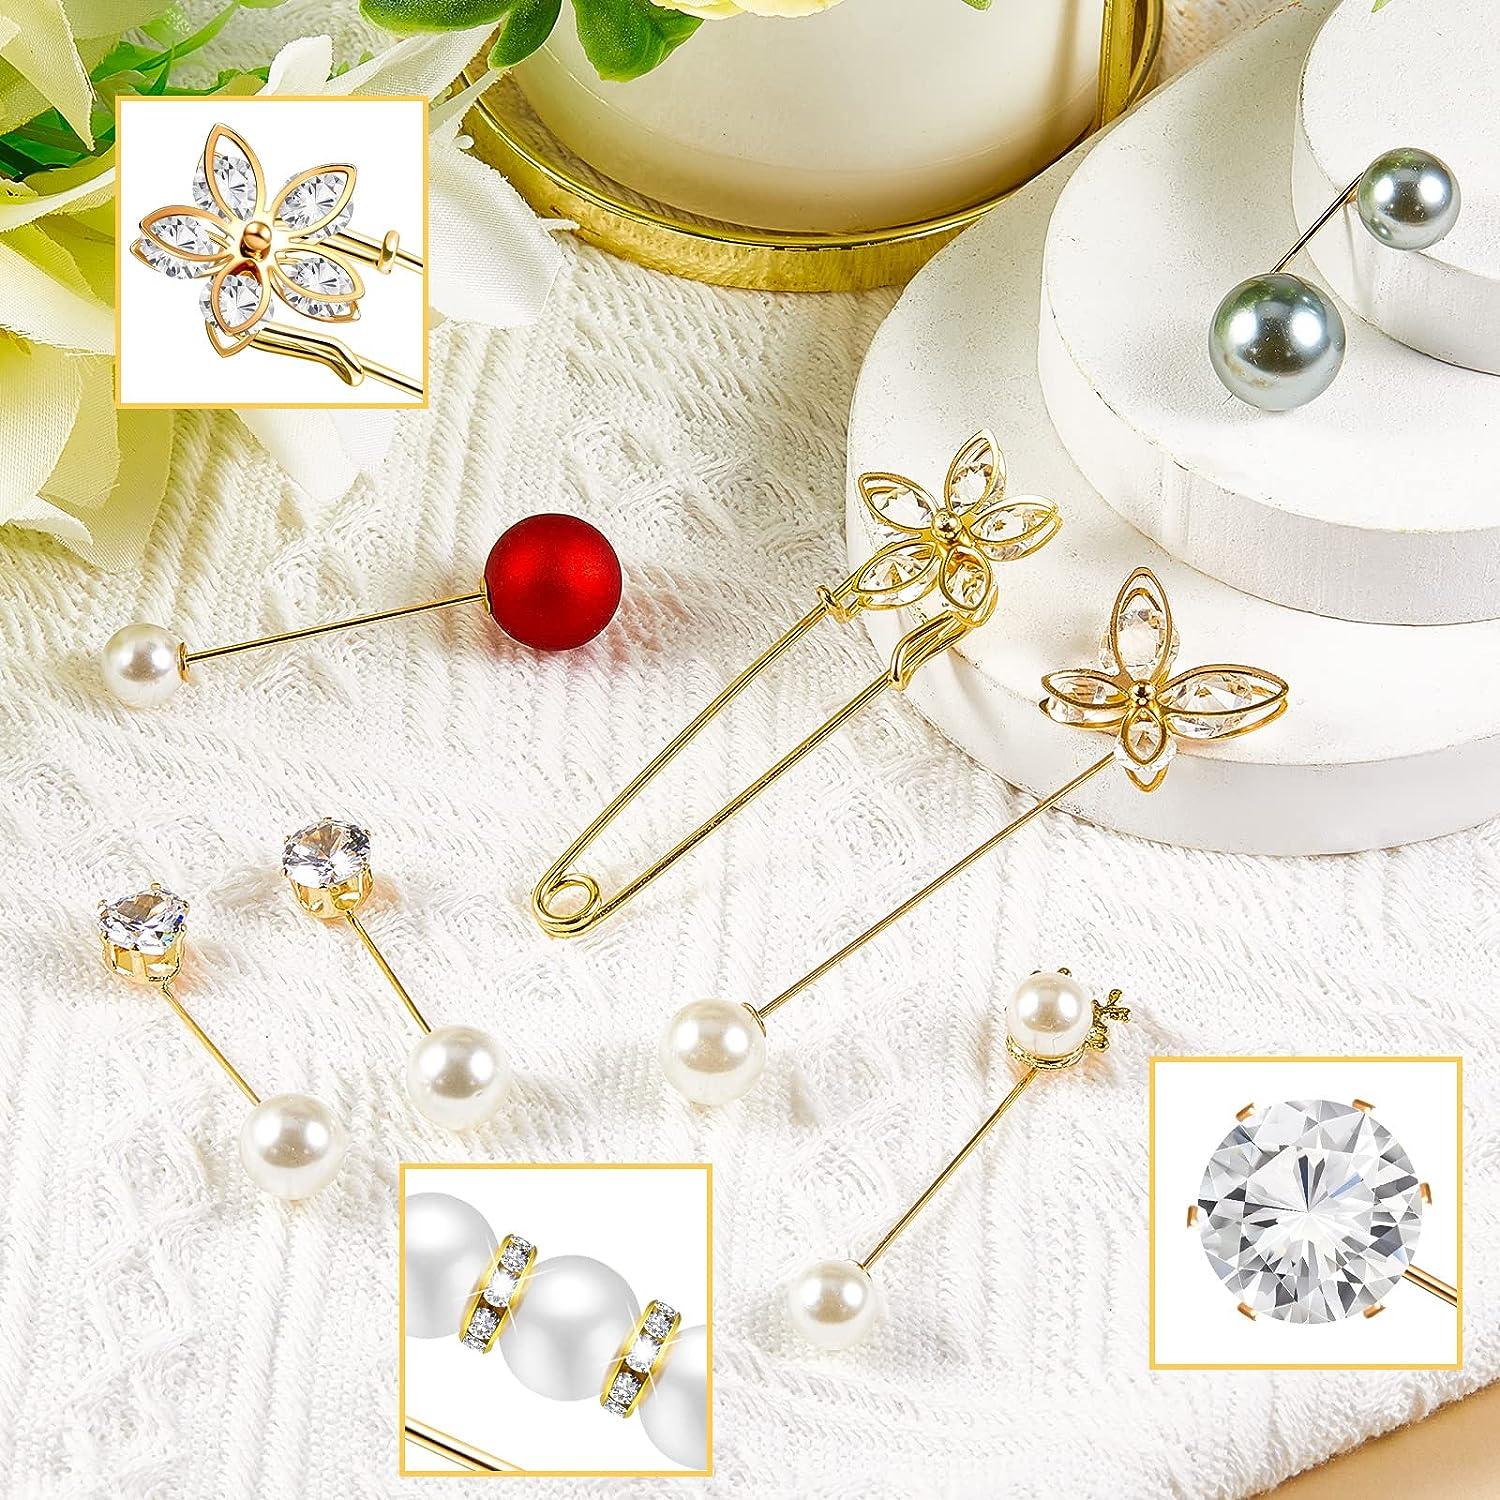 Pearl Brooches Flower Pins for Women Girls White Pin Dress Clips Handmade  Flower Brooch Pins for Women Fashion Lady Brooch 